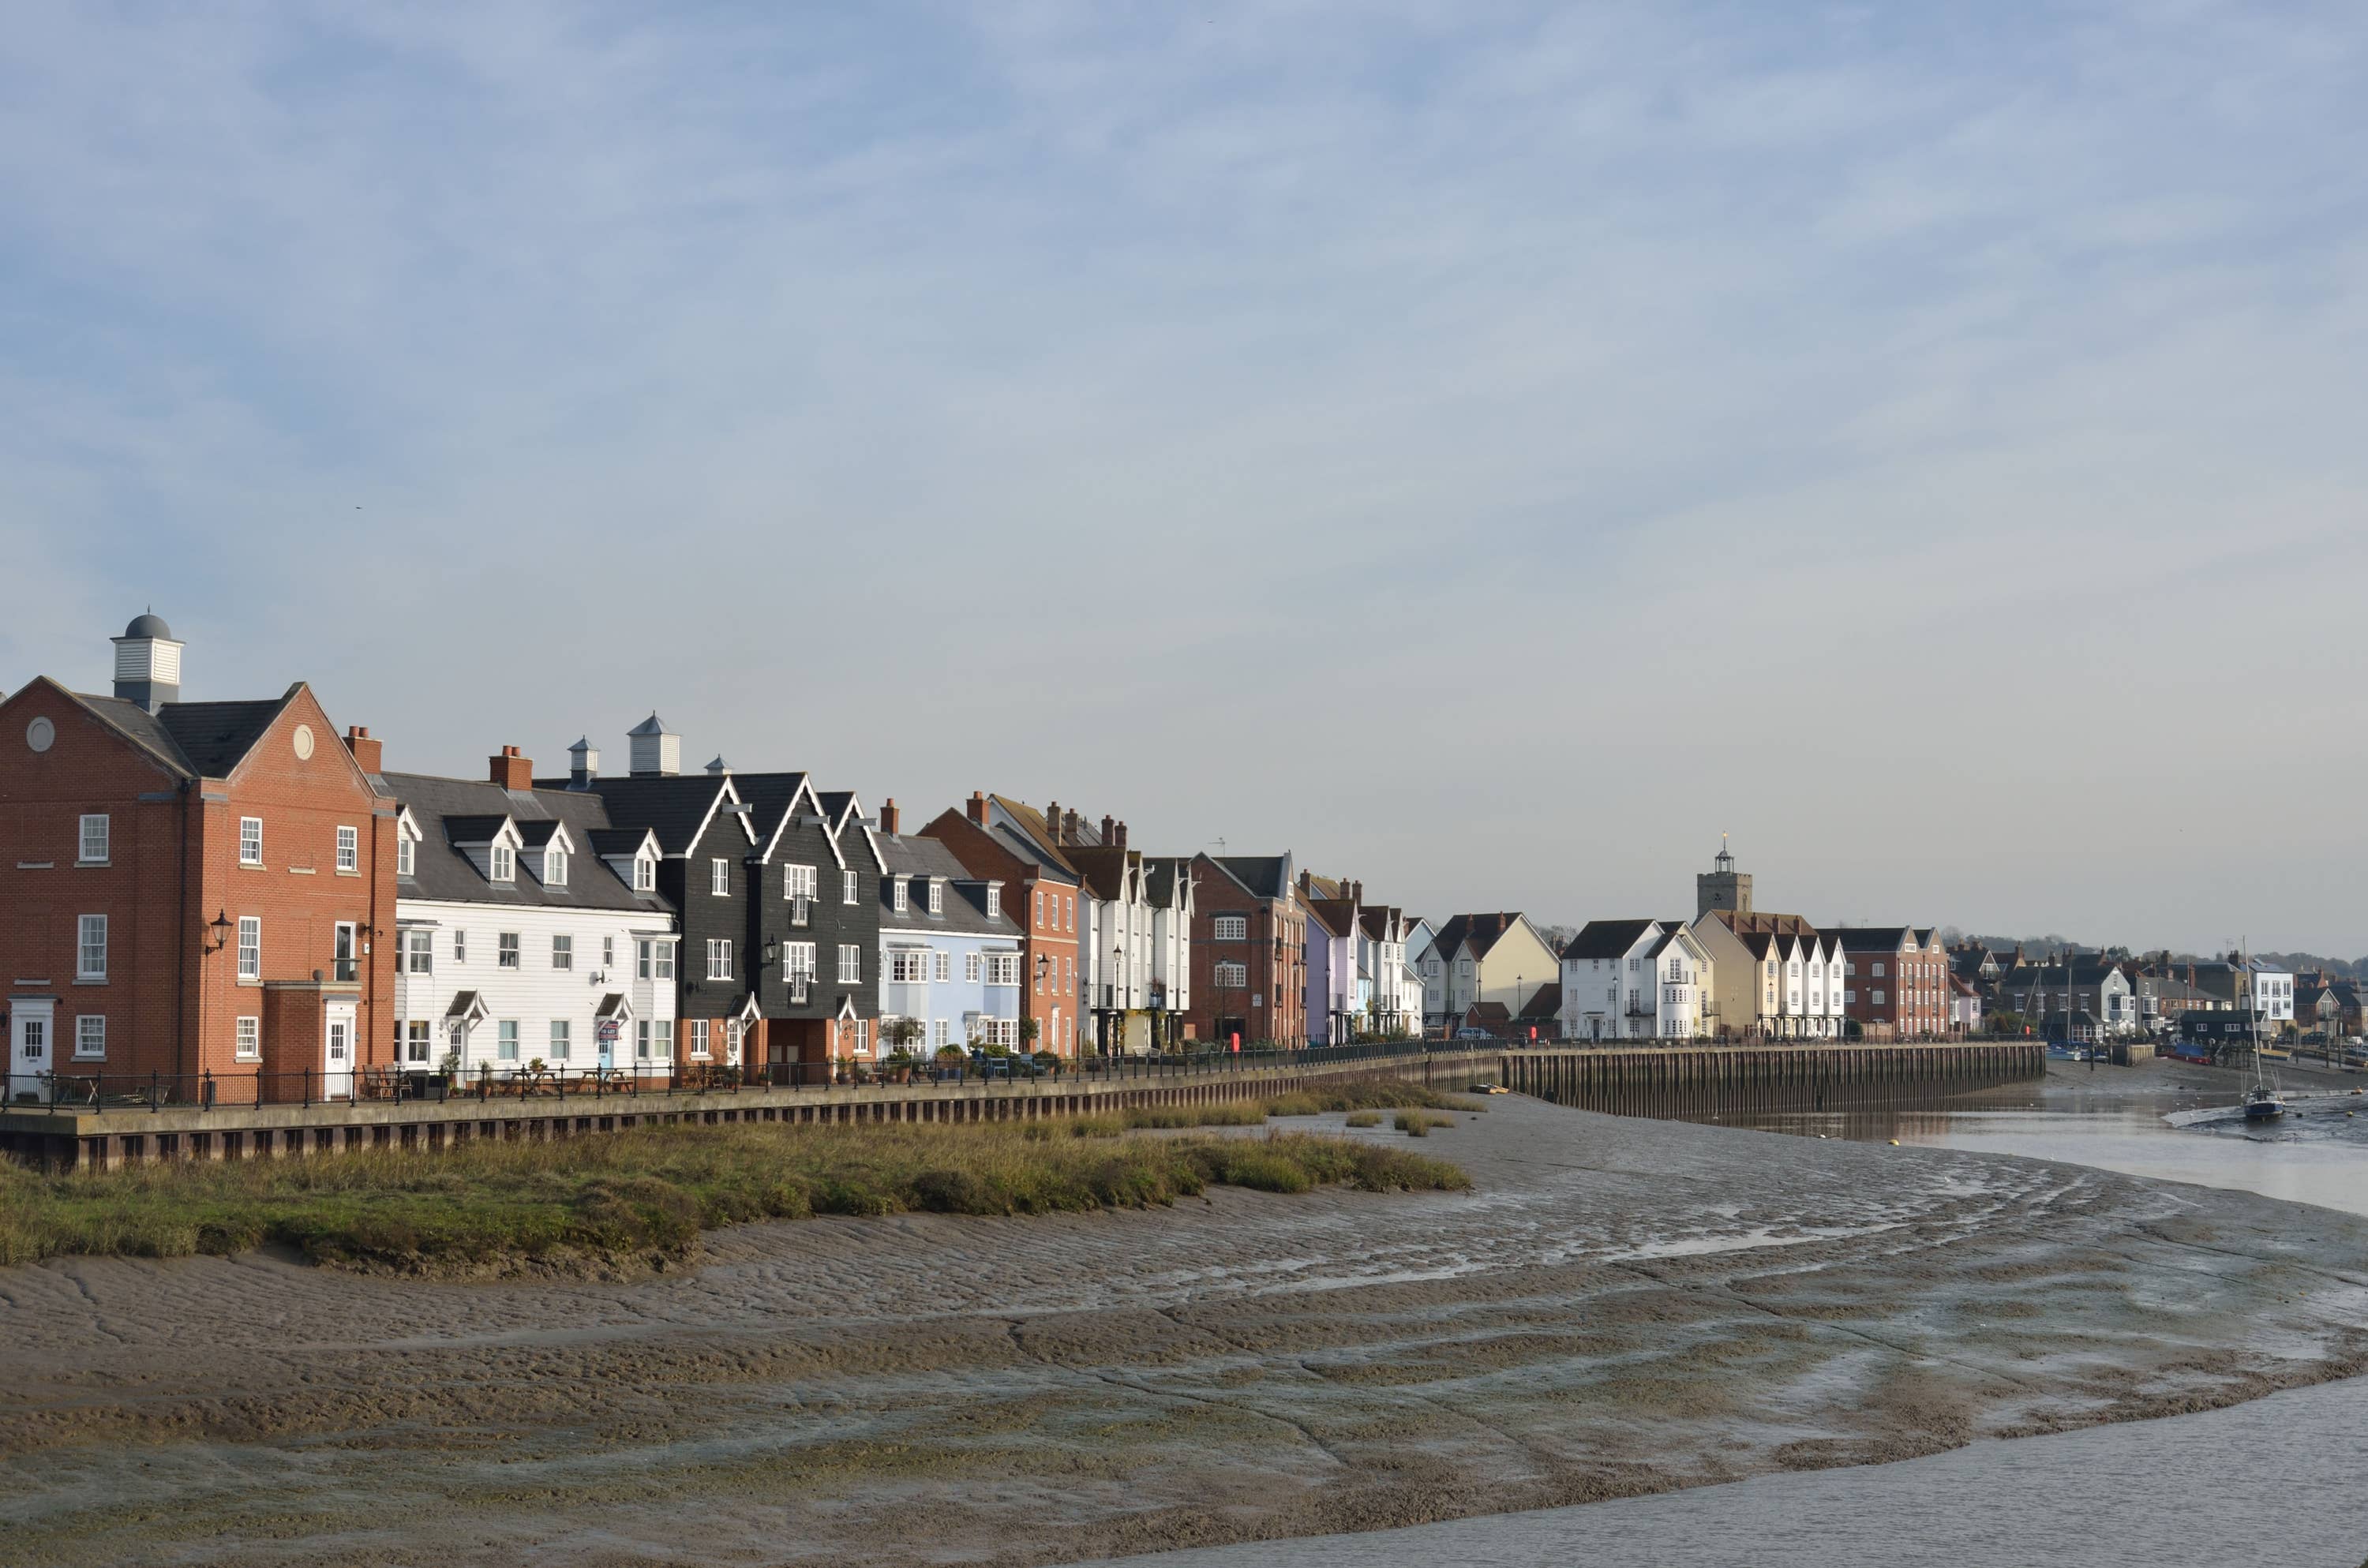 Wivenhoe was described as a picturesque riverside town (Alamy/PA)